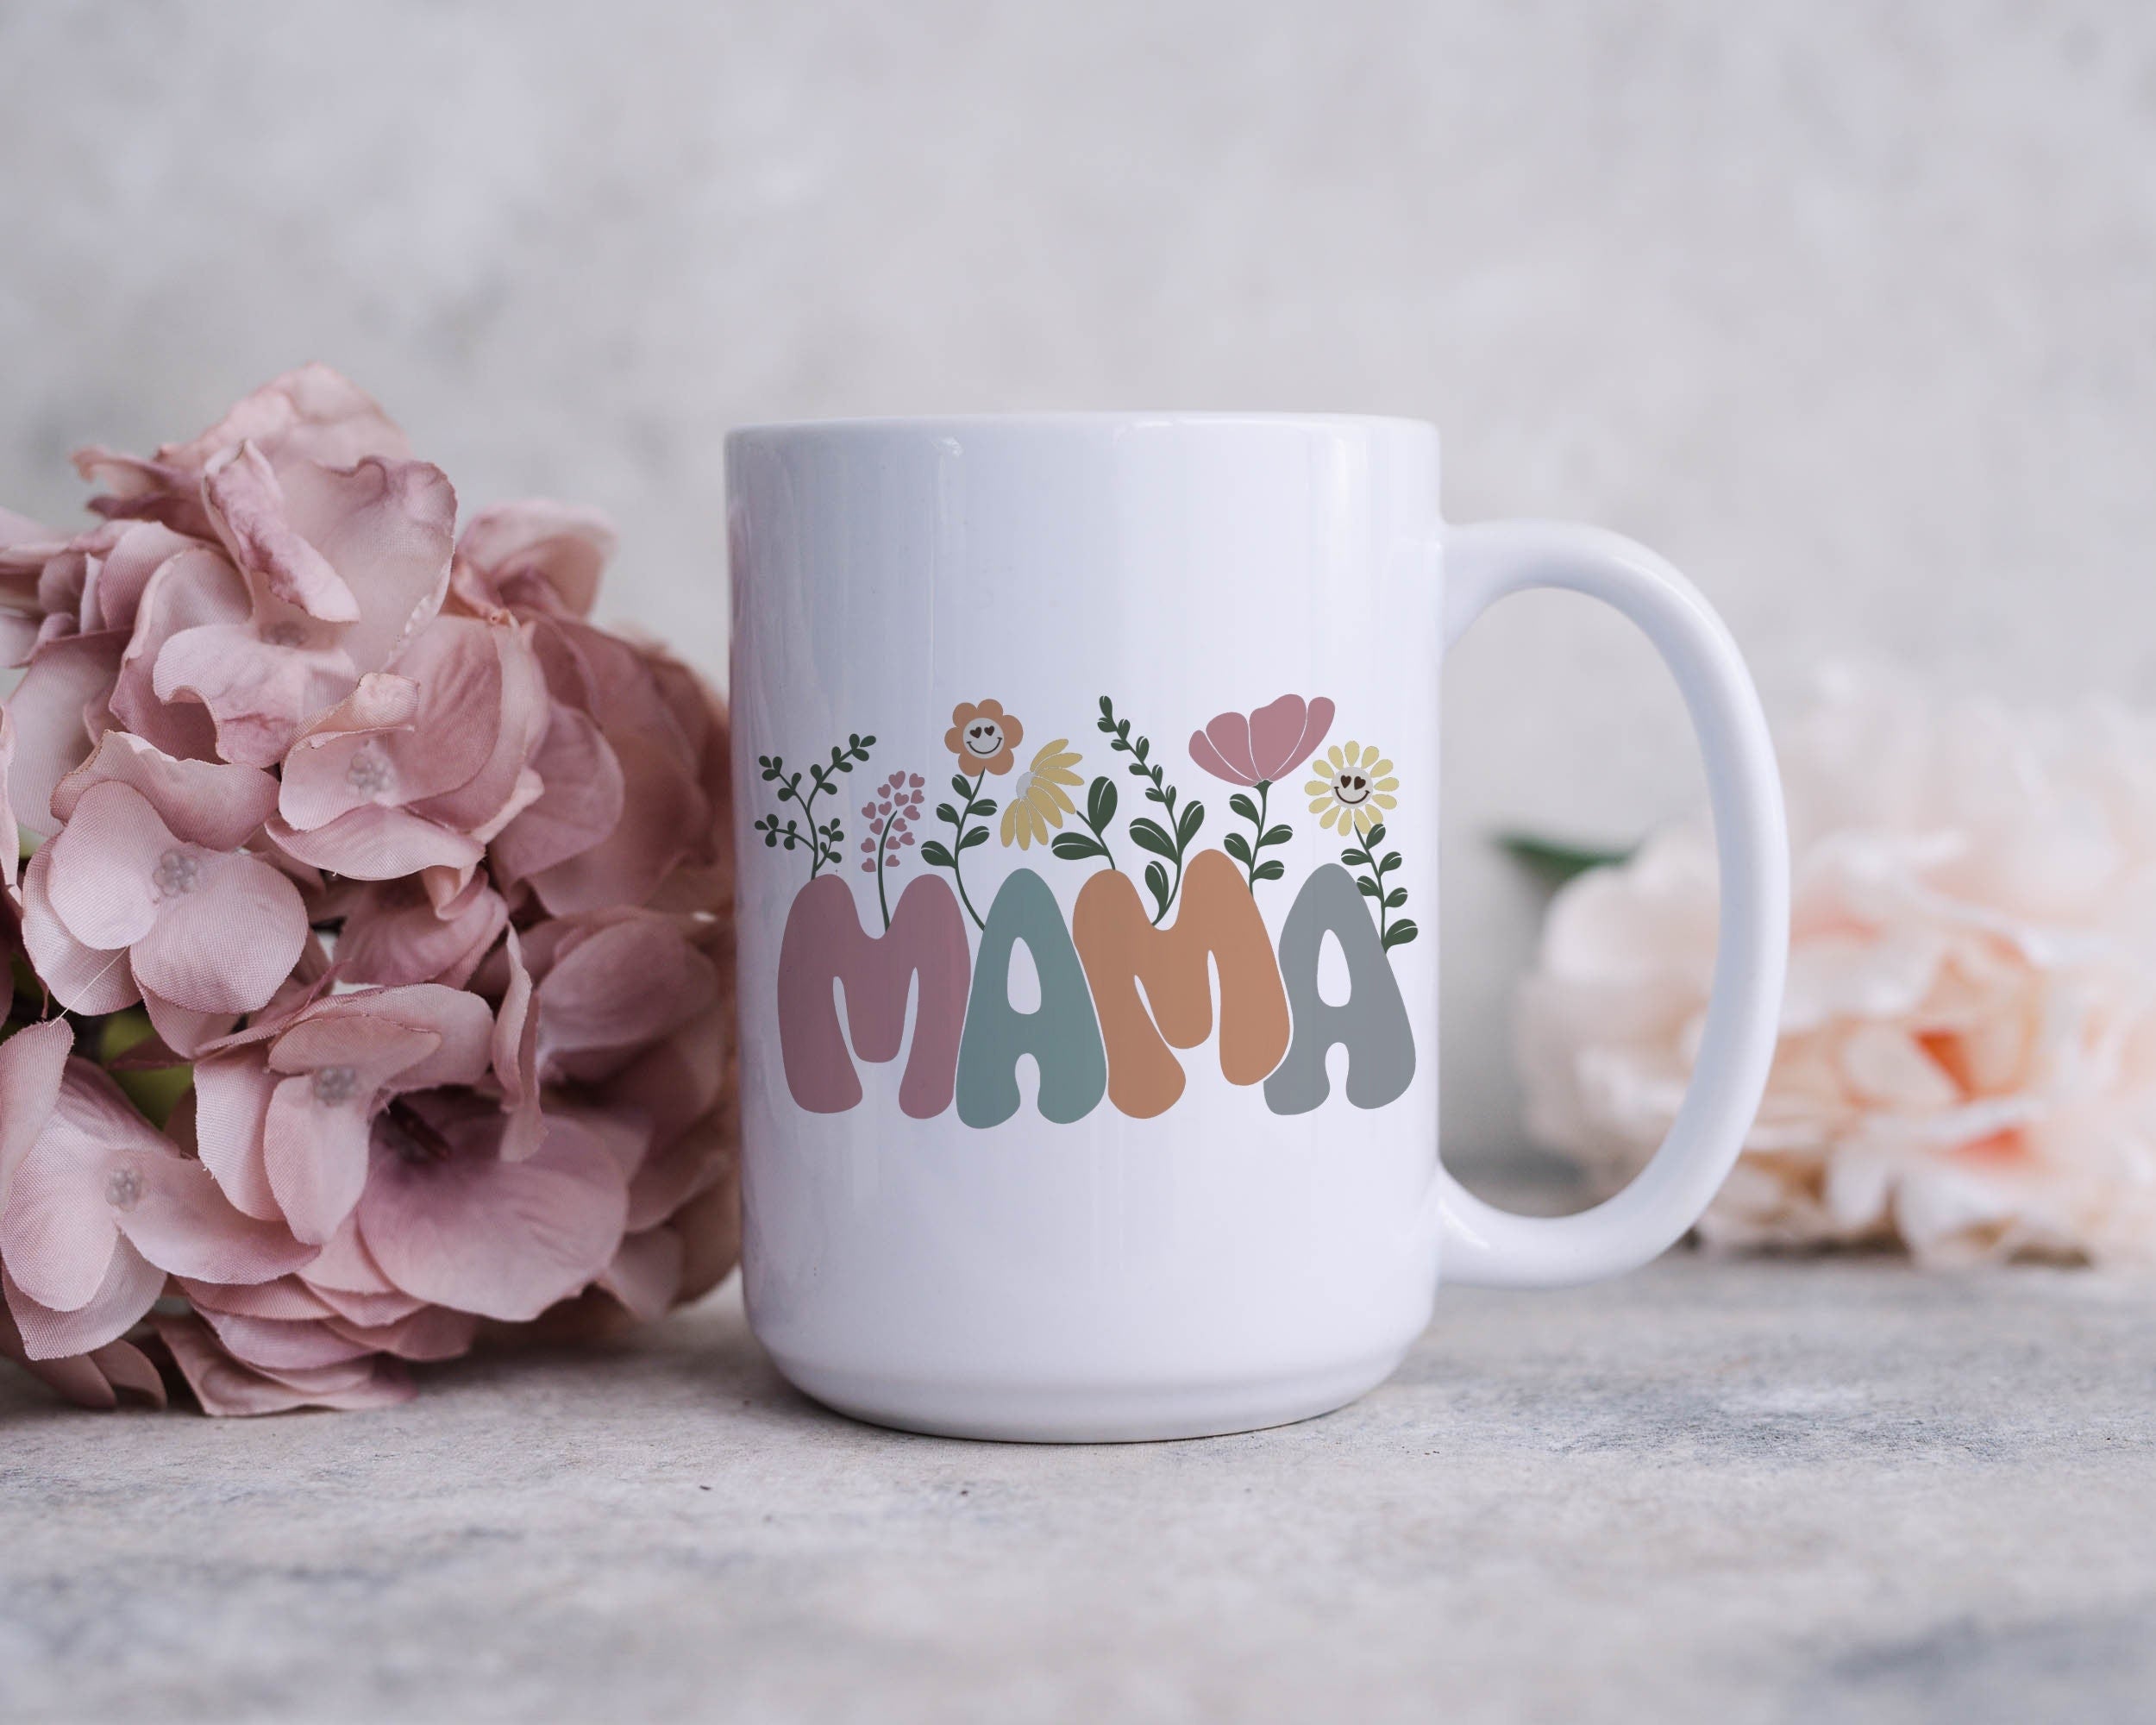 DNA Mug Mothers Day Mug Mothers Day Gift Gift for Mom -   Birthday  presents for mom, Mother's day mugs, Funny mom gifts